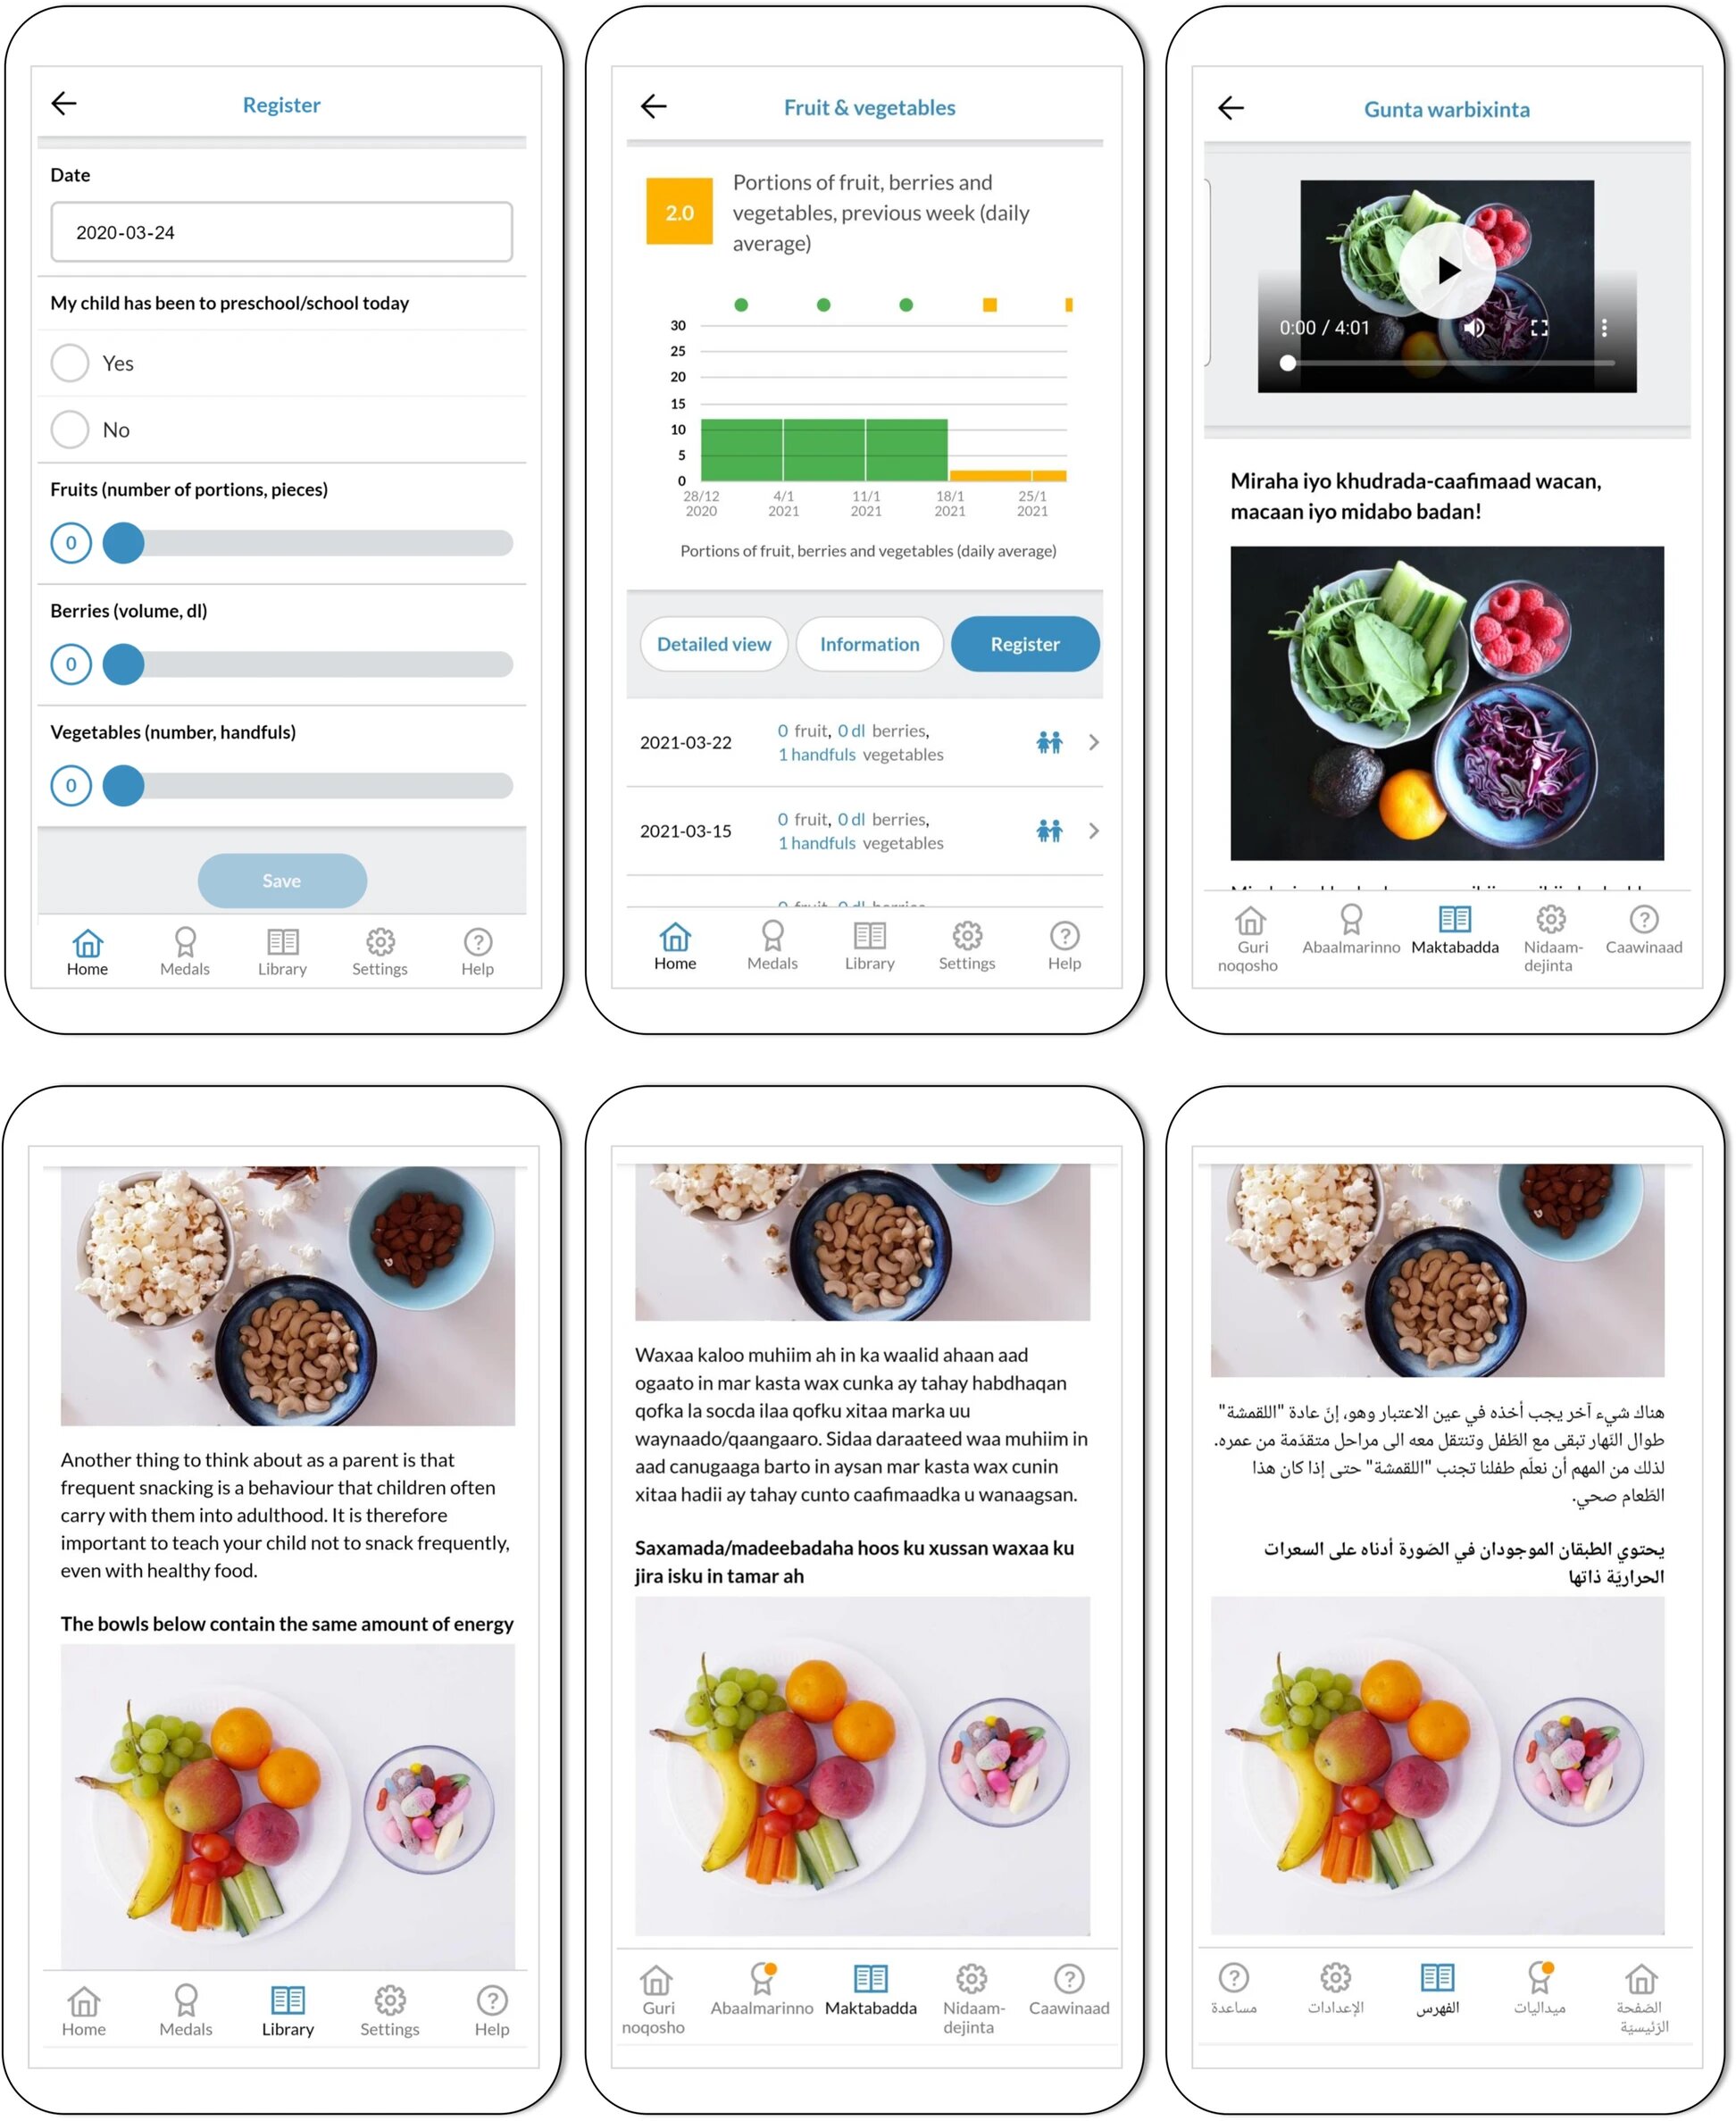 #App helps promote better dietary habits and less screen time in young children